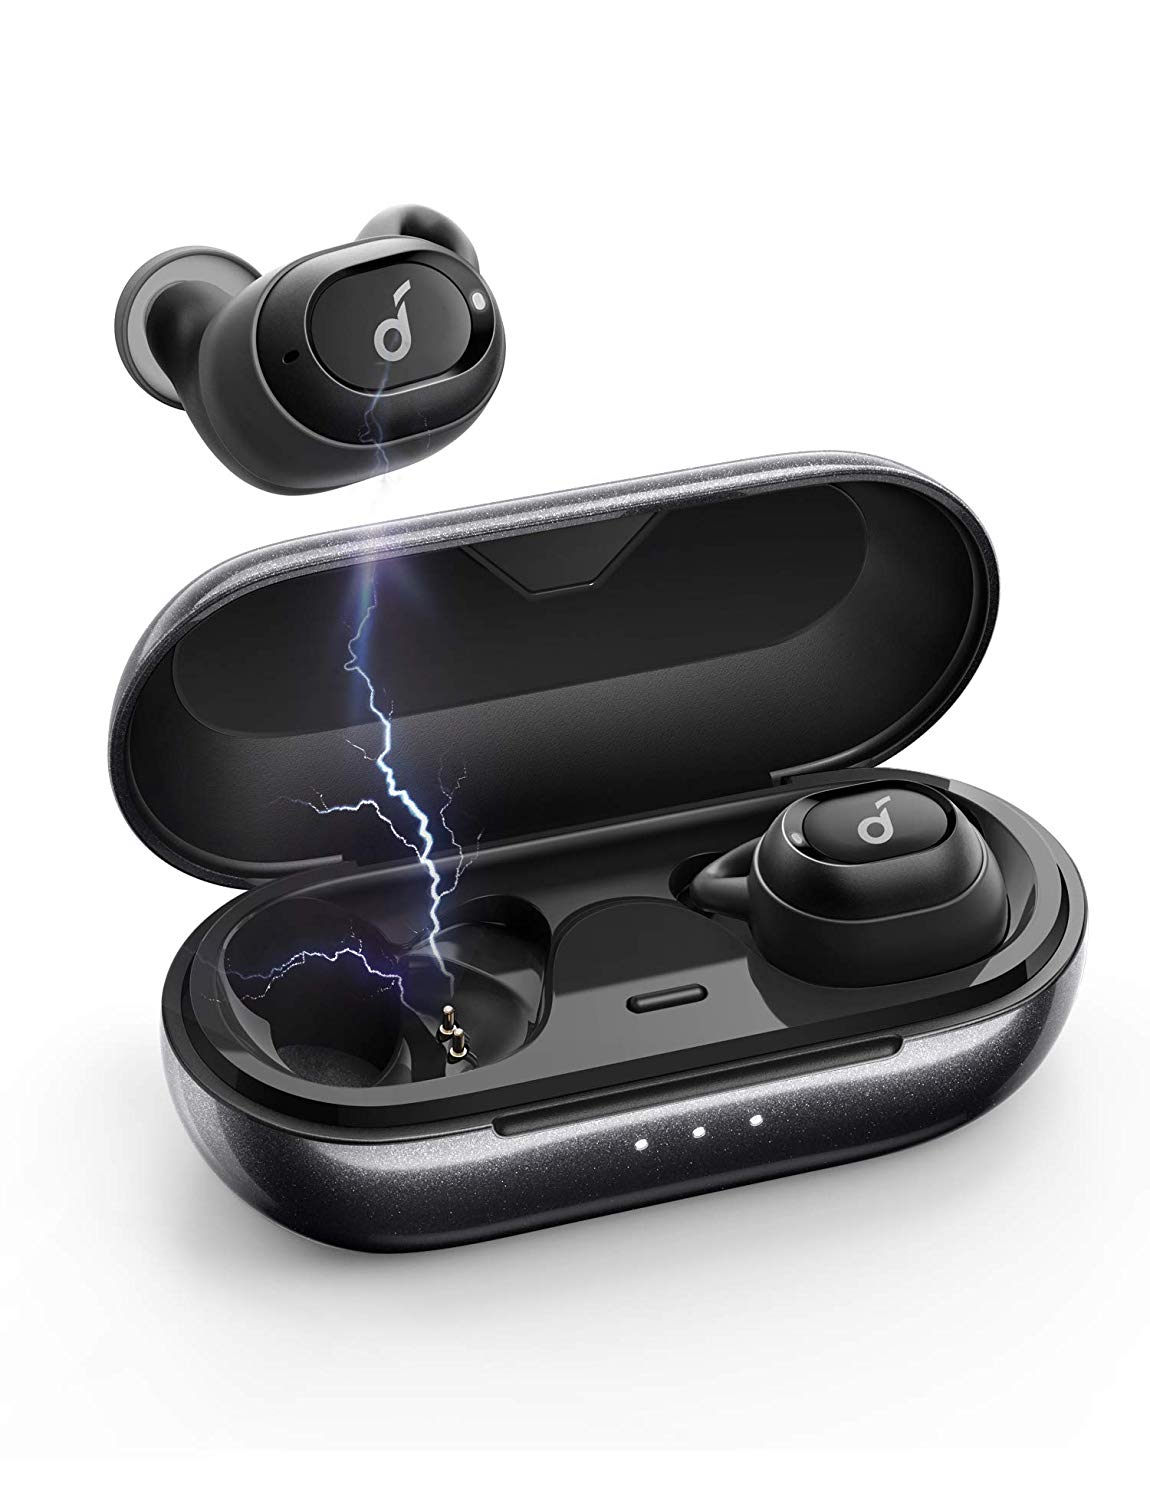 The sleek looking earbuds are designed for comfort and sound quality and on sale for just $49.99 (Photo via Amazon)